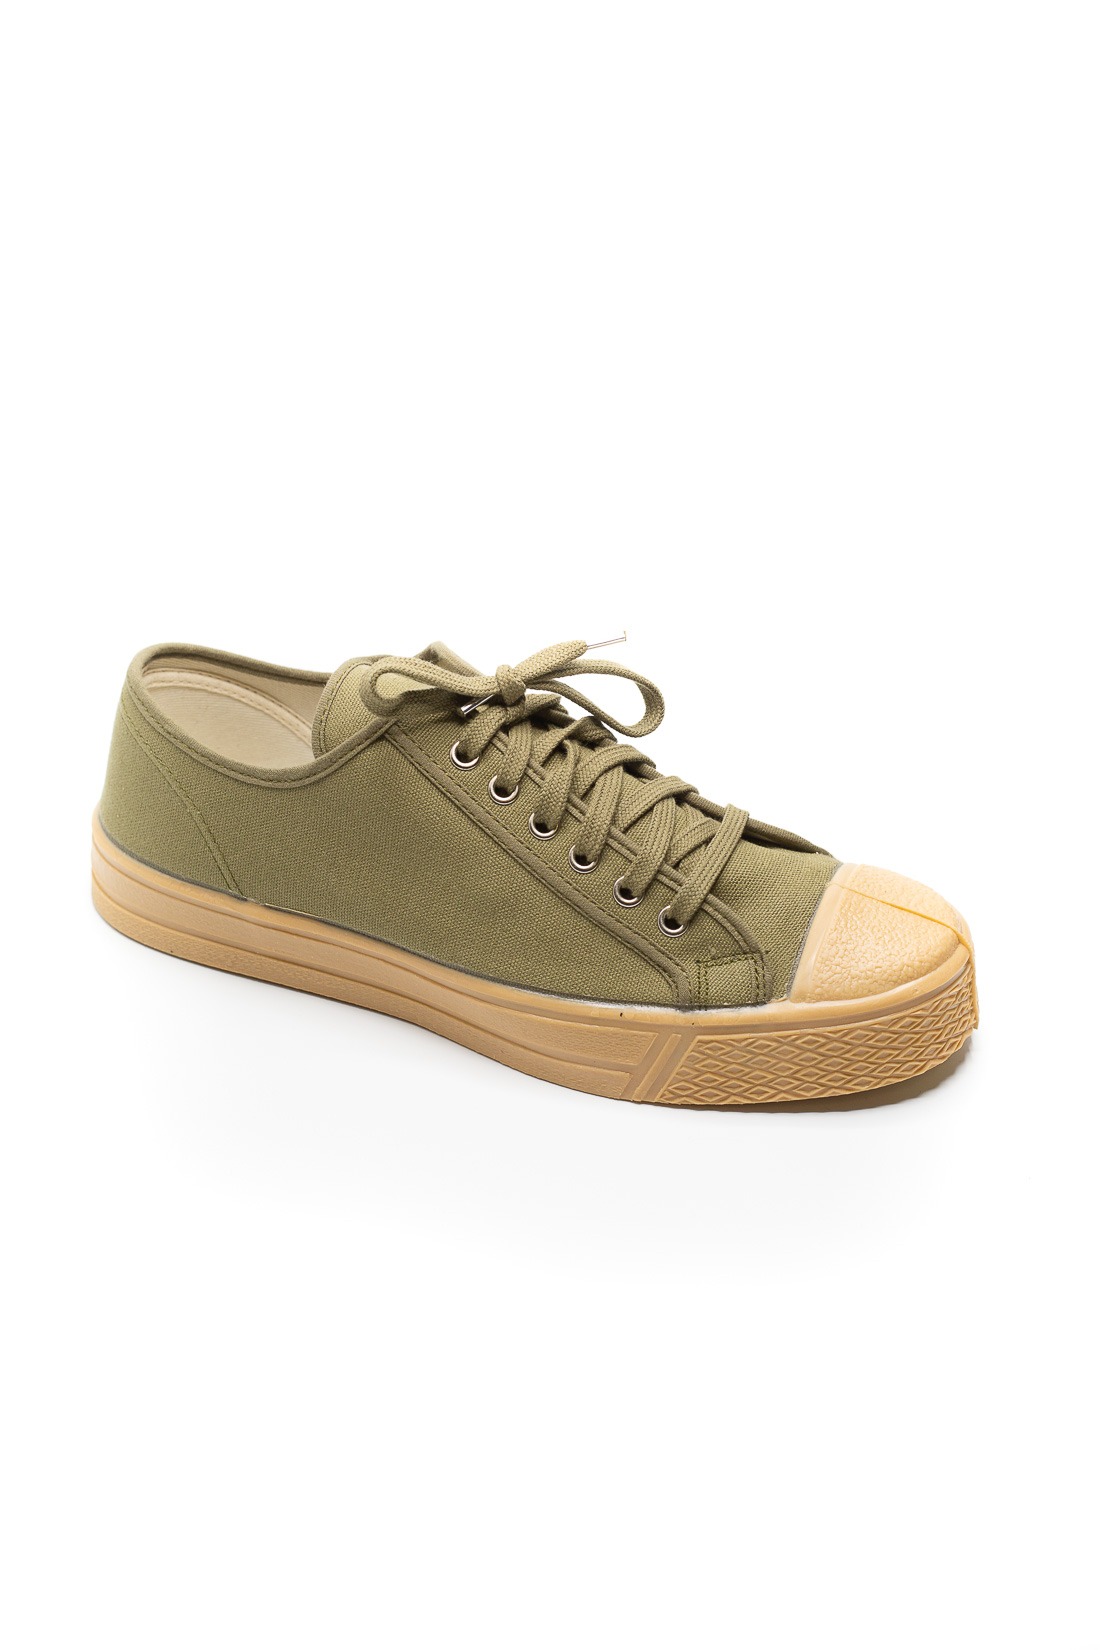 US Rubber Military Low Top - Military Green ( ONLINE ONLY! ) - Pinkomo